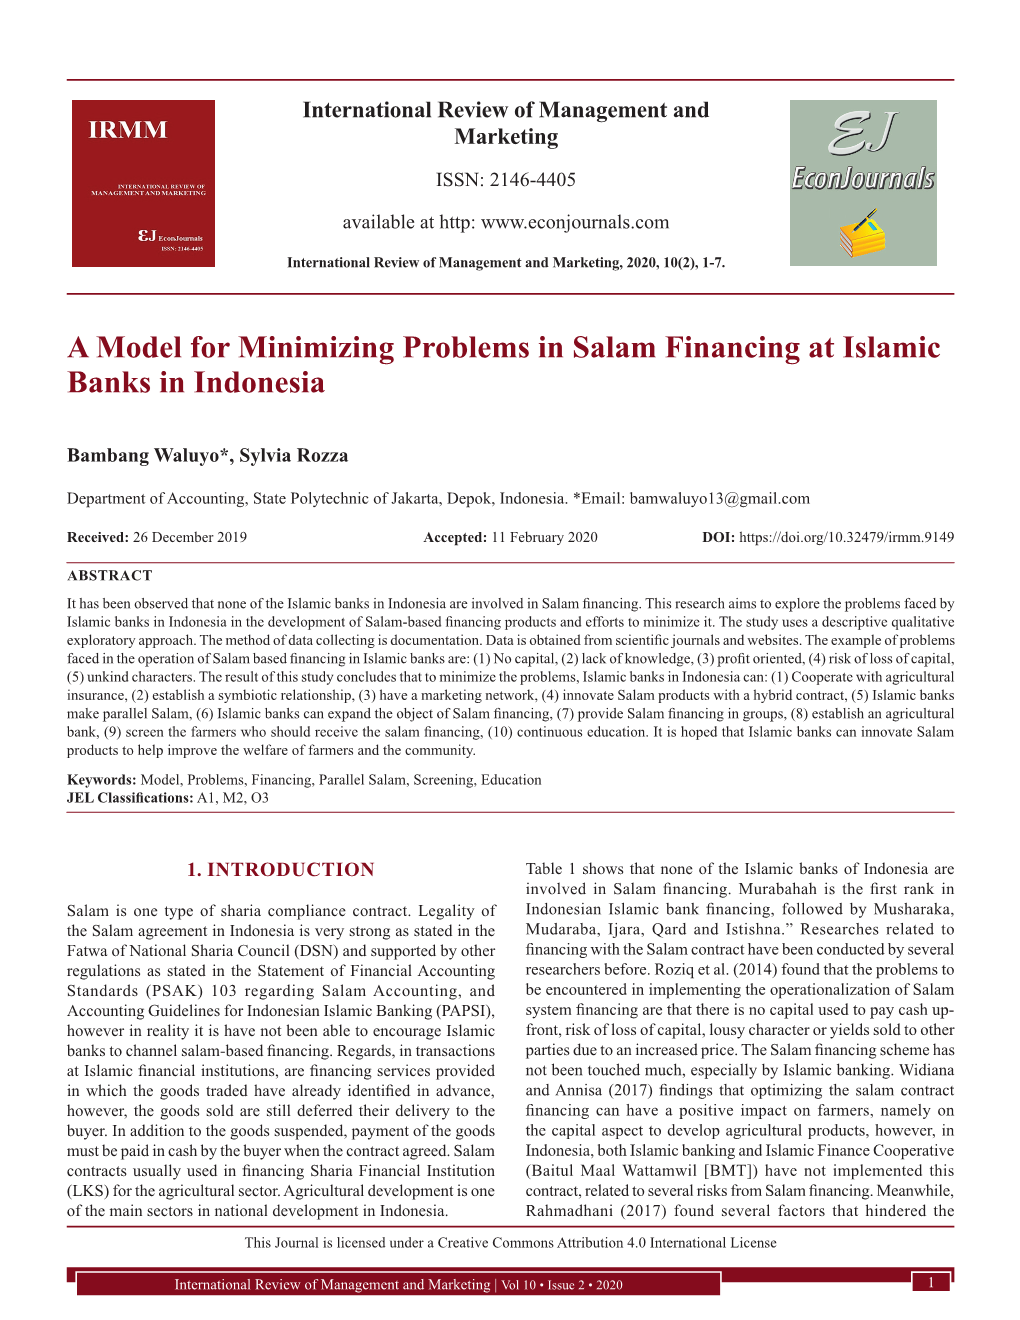 A Model for Minimizing Problems in Salam Financing at Islamic Banks in Indonesia